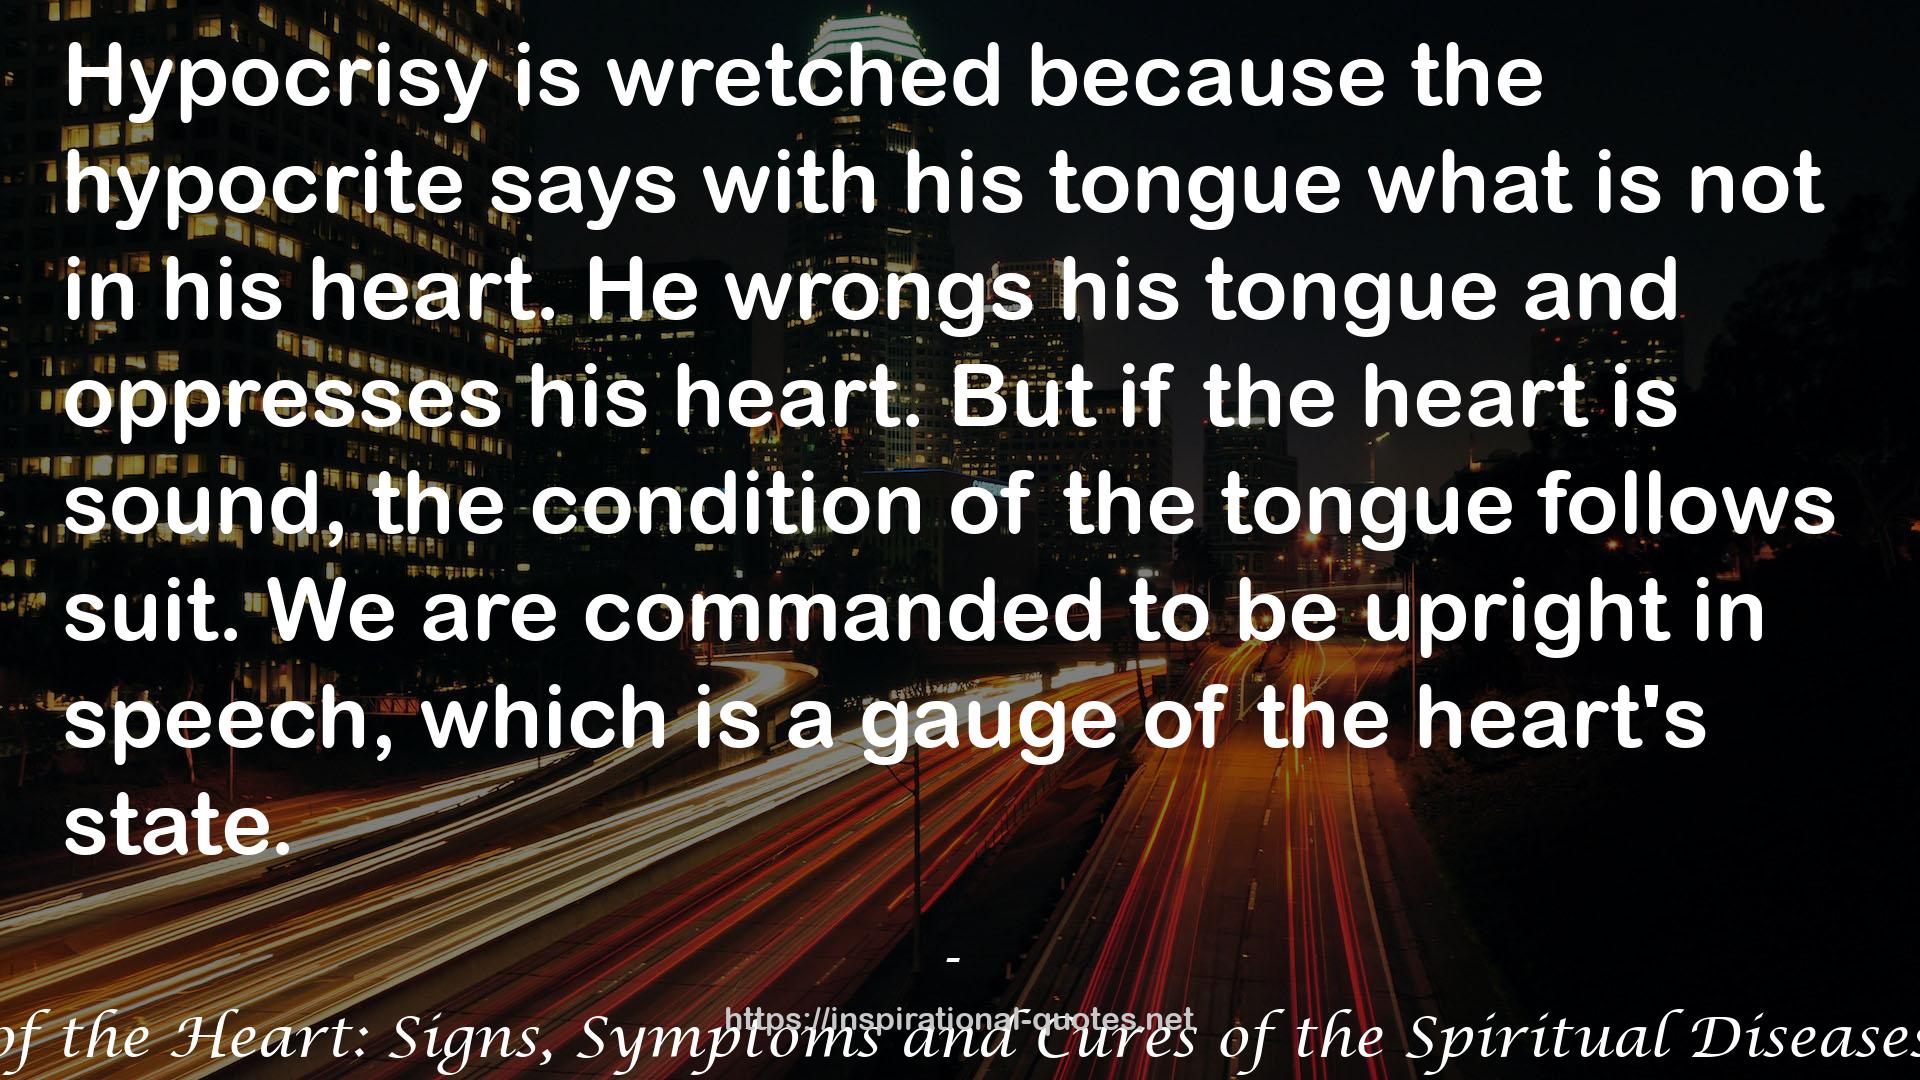 Purification of the Heart: Signs, Symptoms and Cures of the Spiritual Diseases of the Heart QUOTES